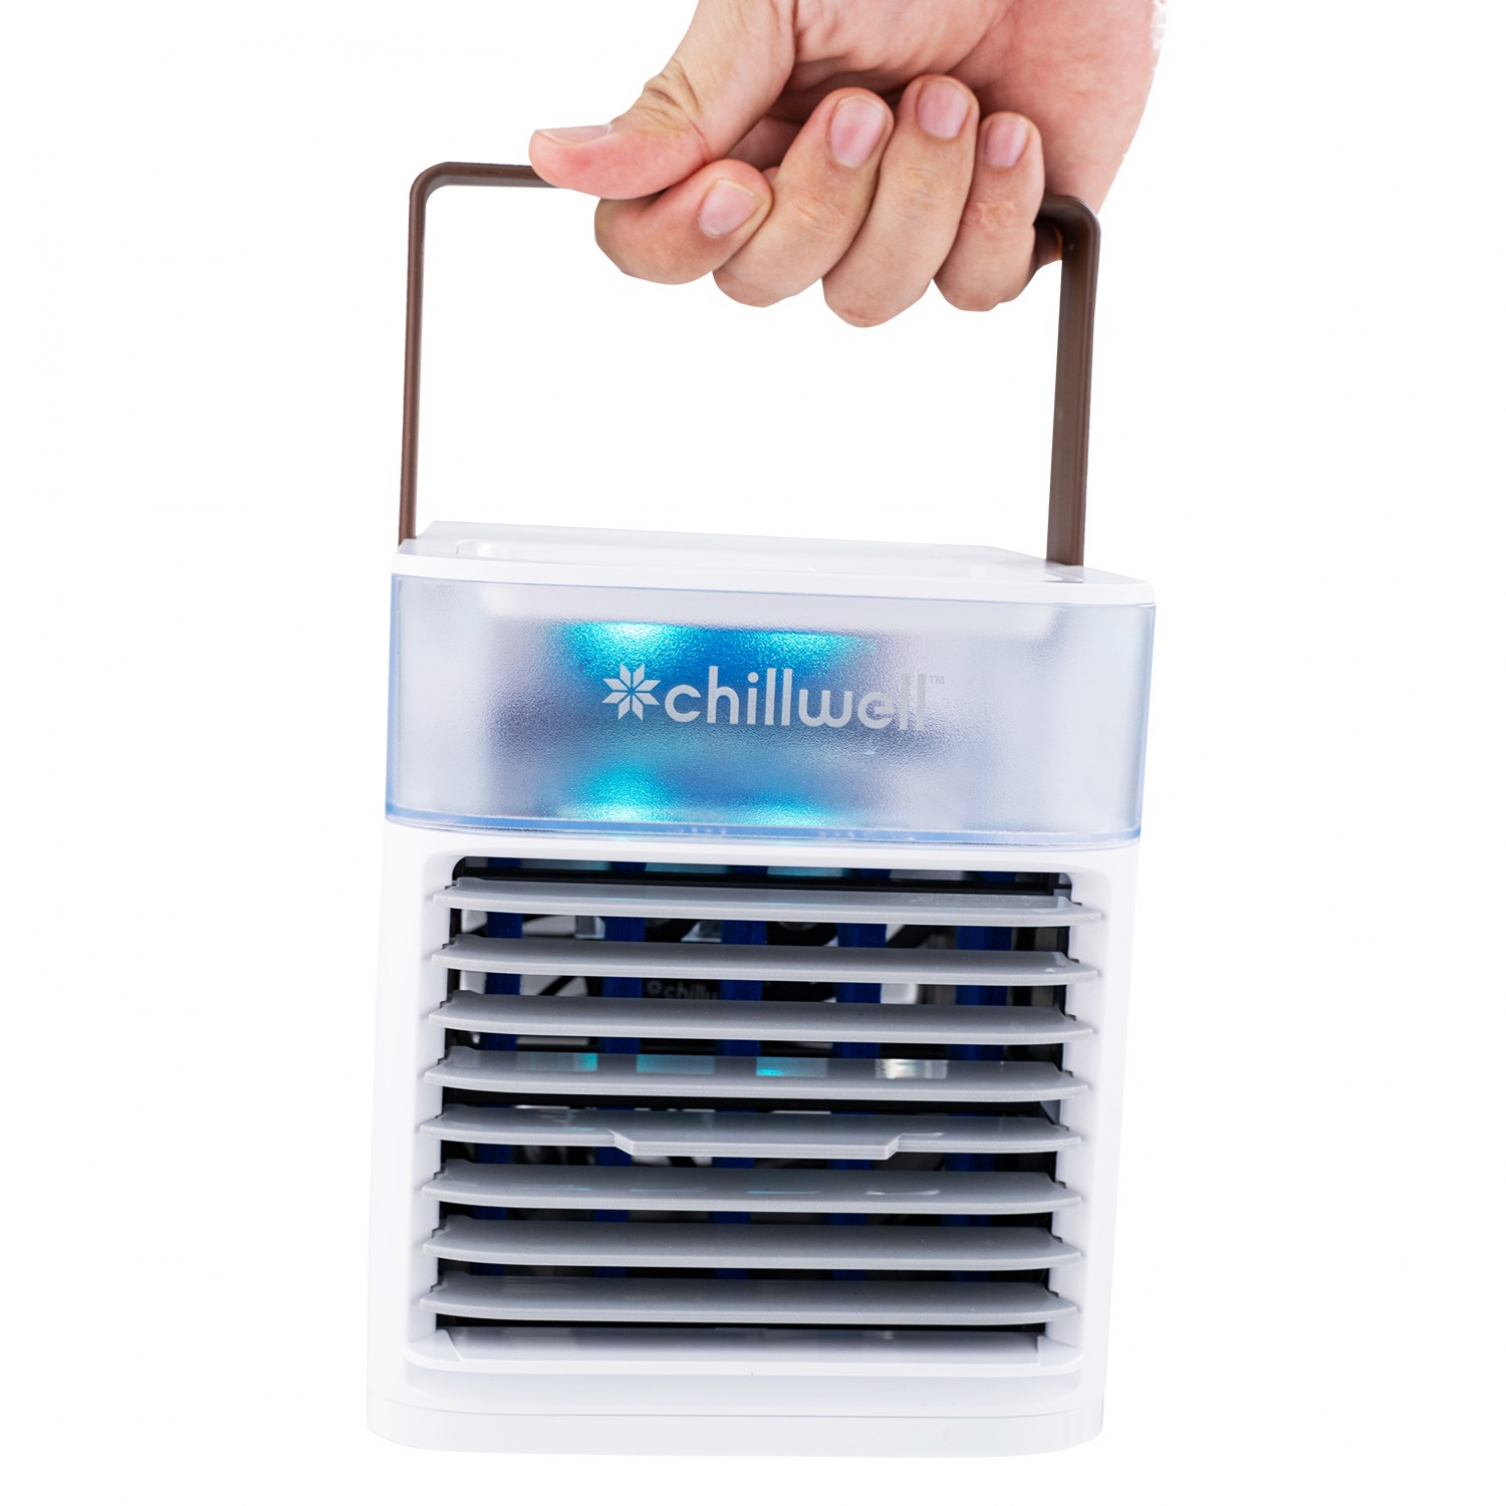 Review Chillwell Ac Portable Ac